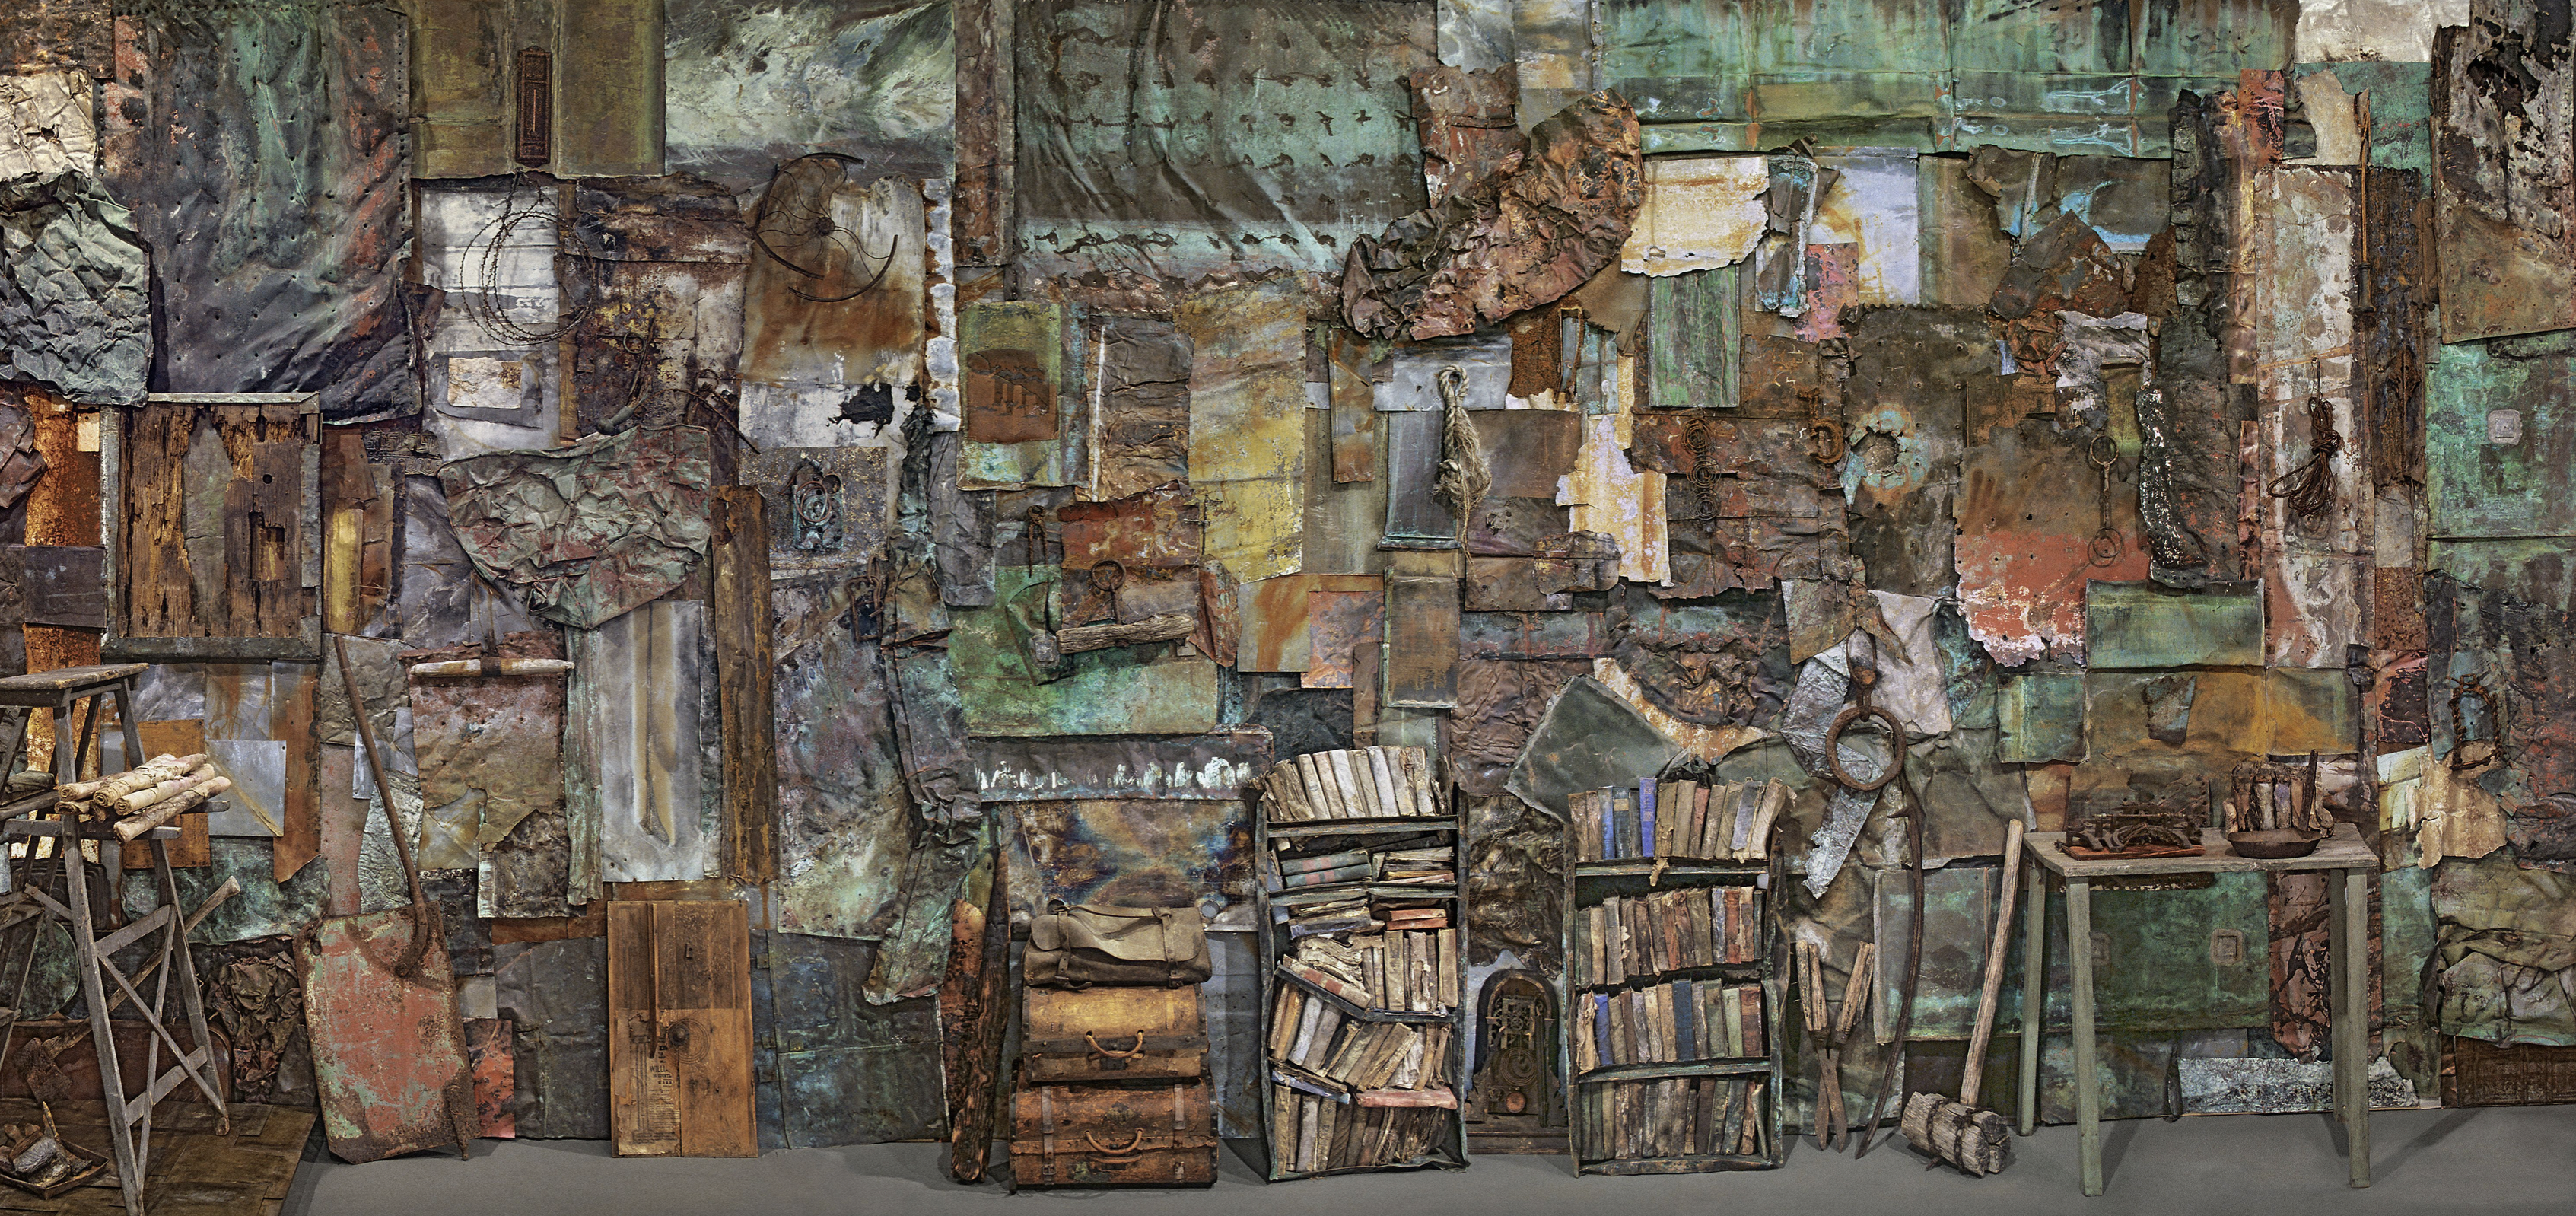  Rosamond Purcell, ‘Wall,’ 1990s. Mixed media installation, 121 by 264 by 5in. Courtesy of the artist. © Rosamond Purcell